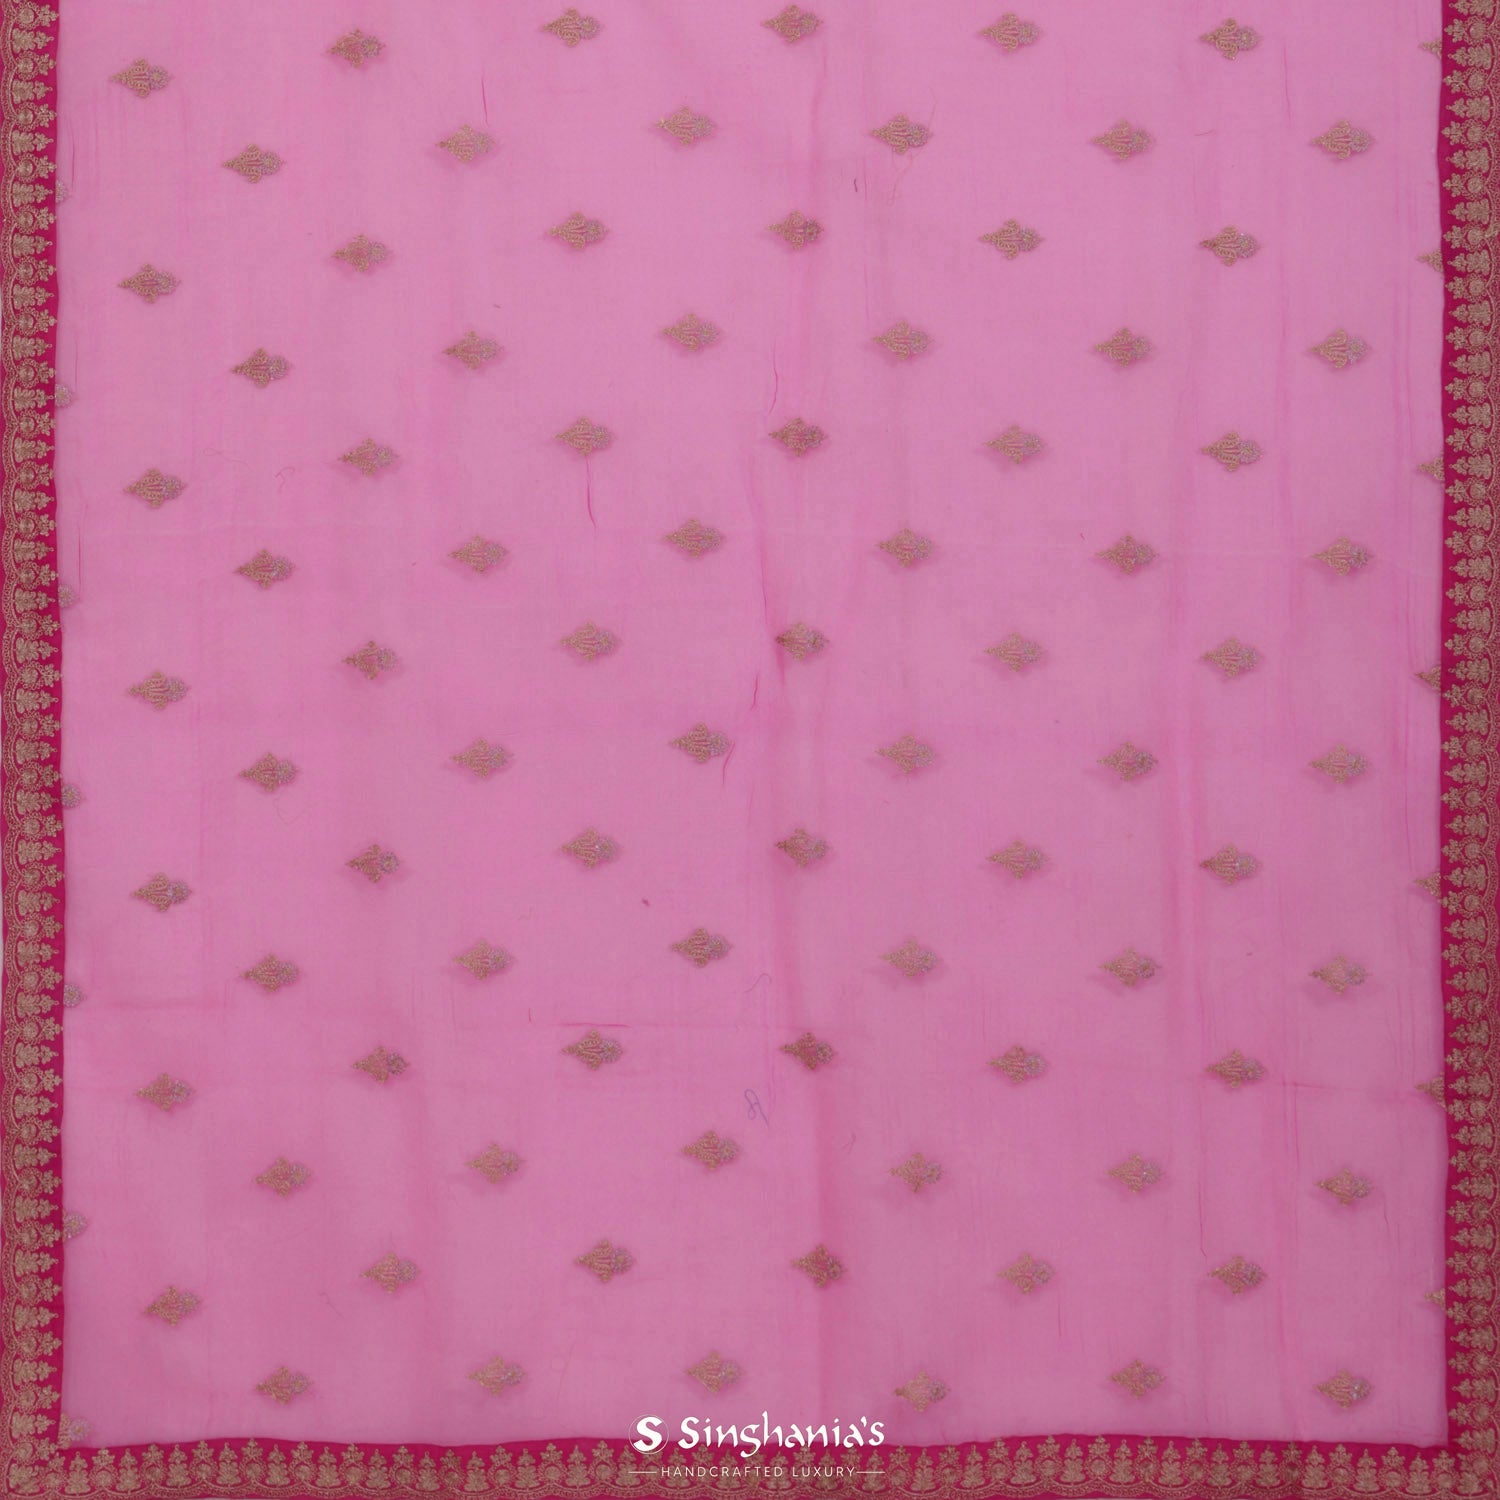 Cherry Pink Printed Organza Saree With Floral Pattern